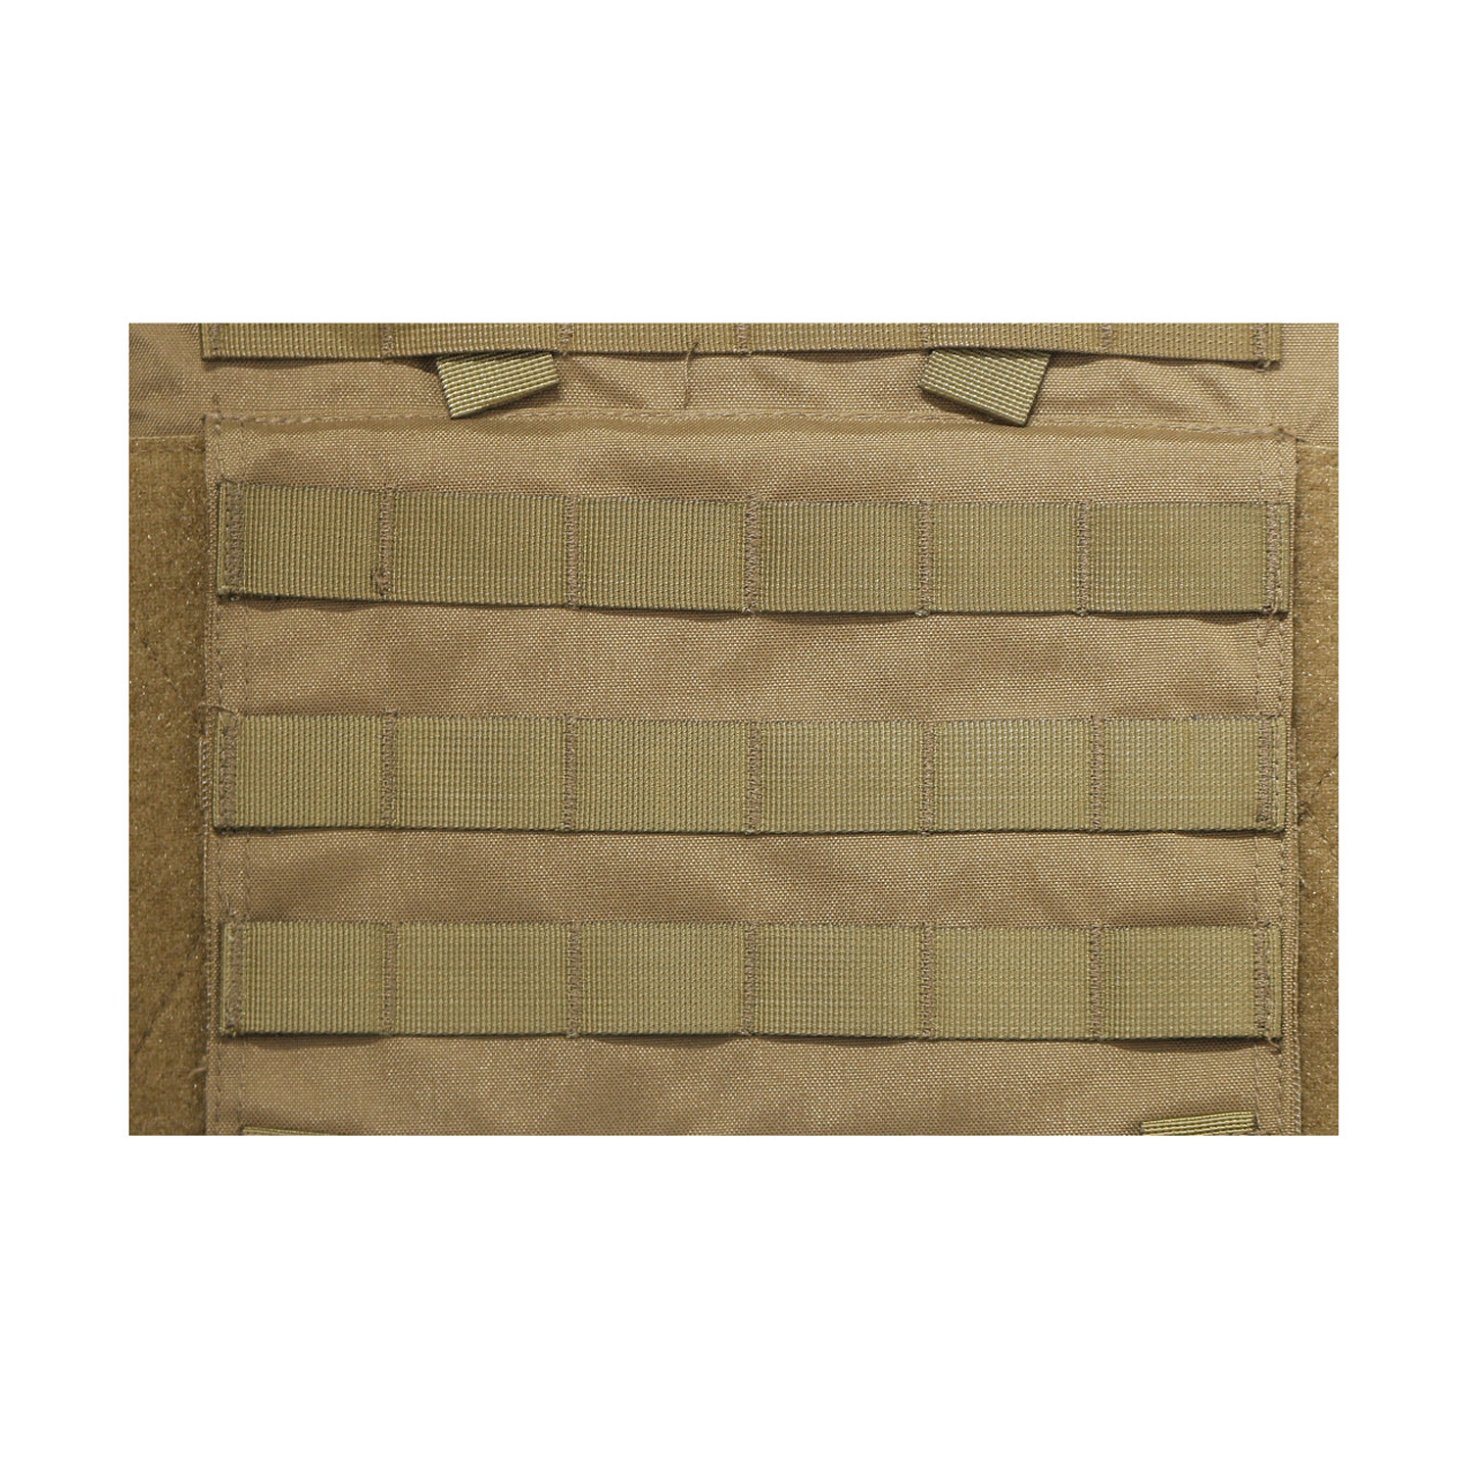 Light Weight High Quality 600d Upgrade Bulletproof Military Vest Tactical Plate Carrier